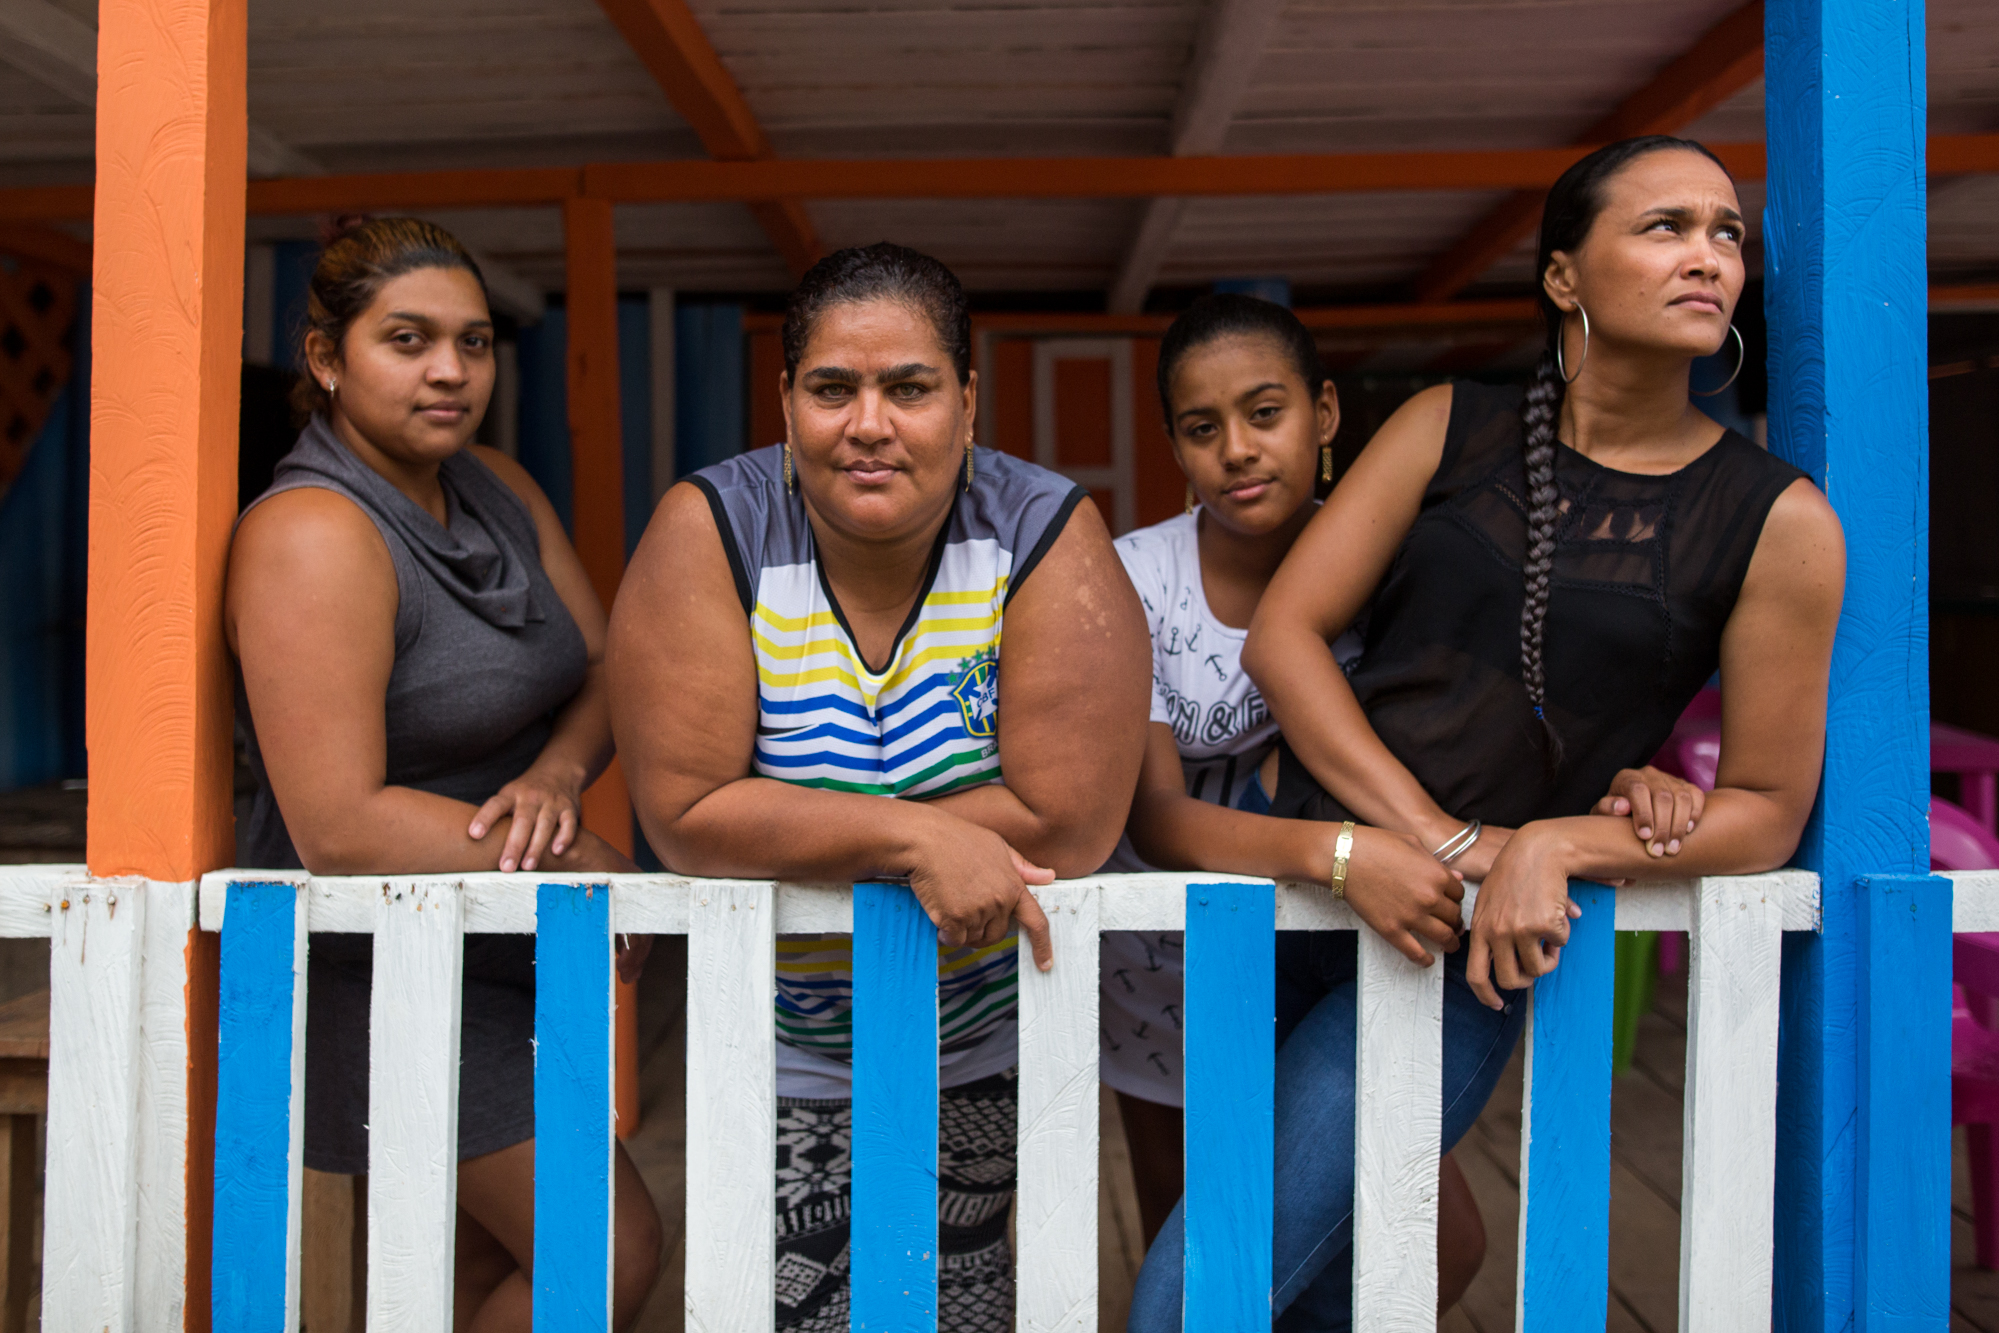  Marisol Cueto, 42 (second from left), with her nieces Mayerly, 24, Yessica, 12 and Viviana, 32 in her restaurant. Marisol was one of the founders of Mina Walter 15 years ago and is now concerned that her family and business may be displaced by econo